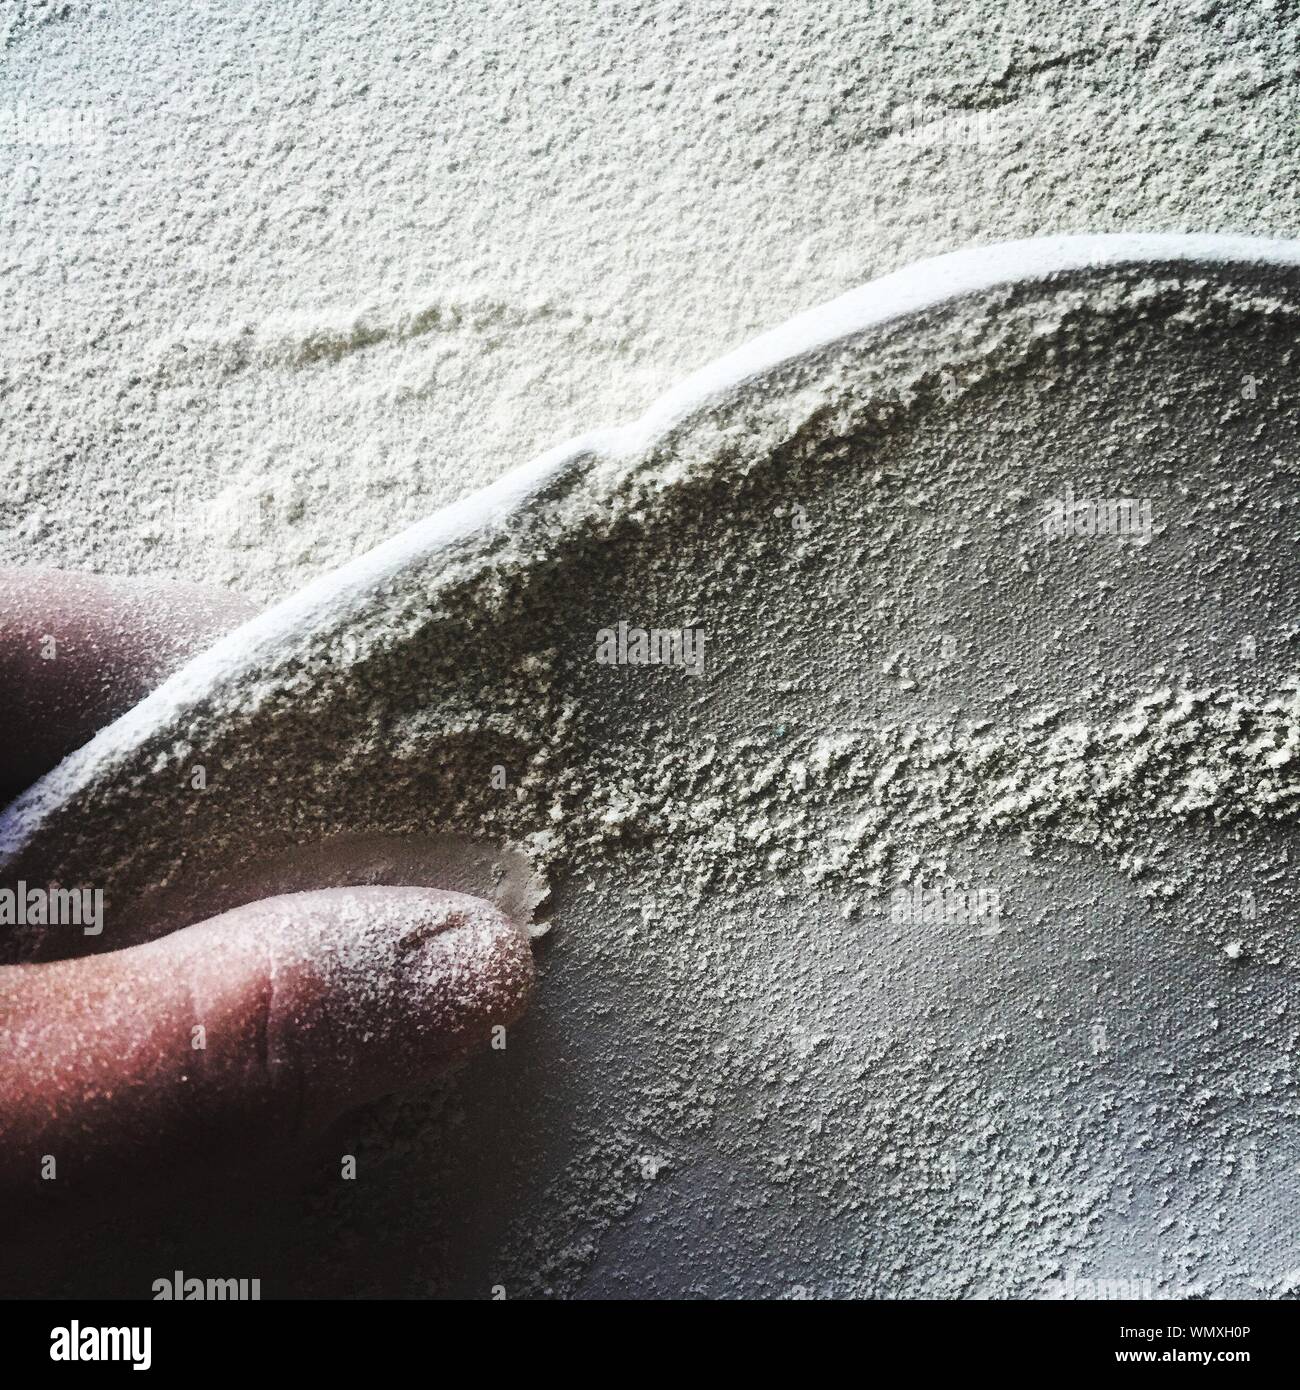 Cropped Image Of Craftsperson With Sand At Workshop Stock Photo